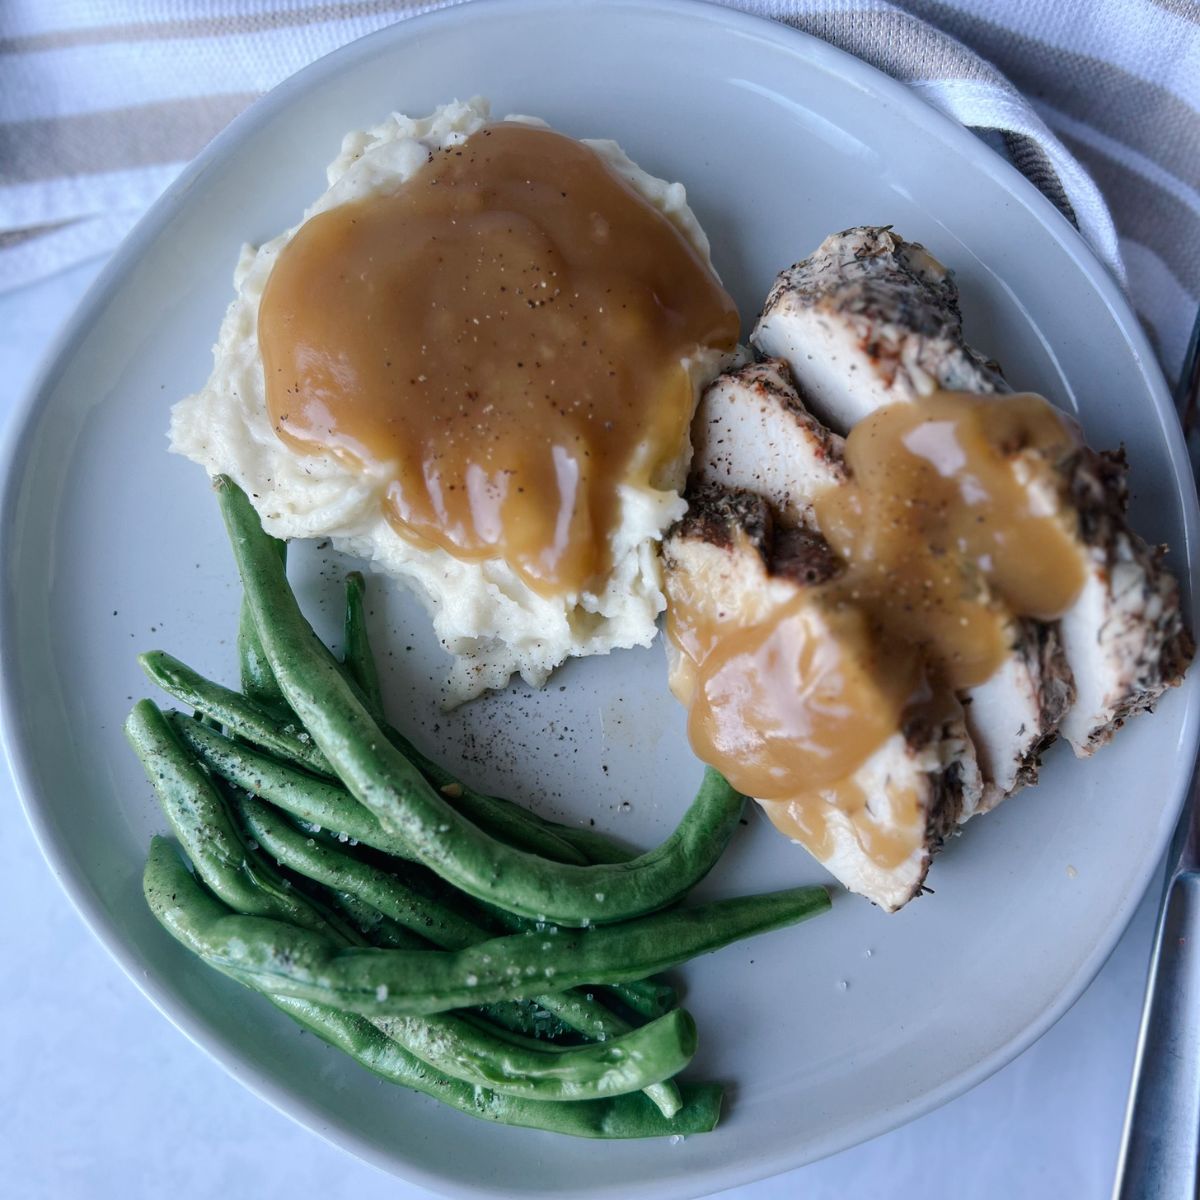 mashed potatoes and gravy, turkey tenderloin with gravy on top, and green beans all on a plate.